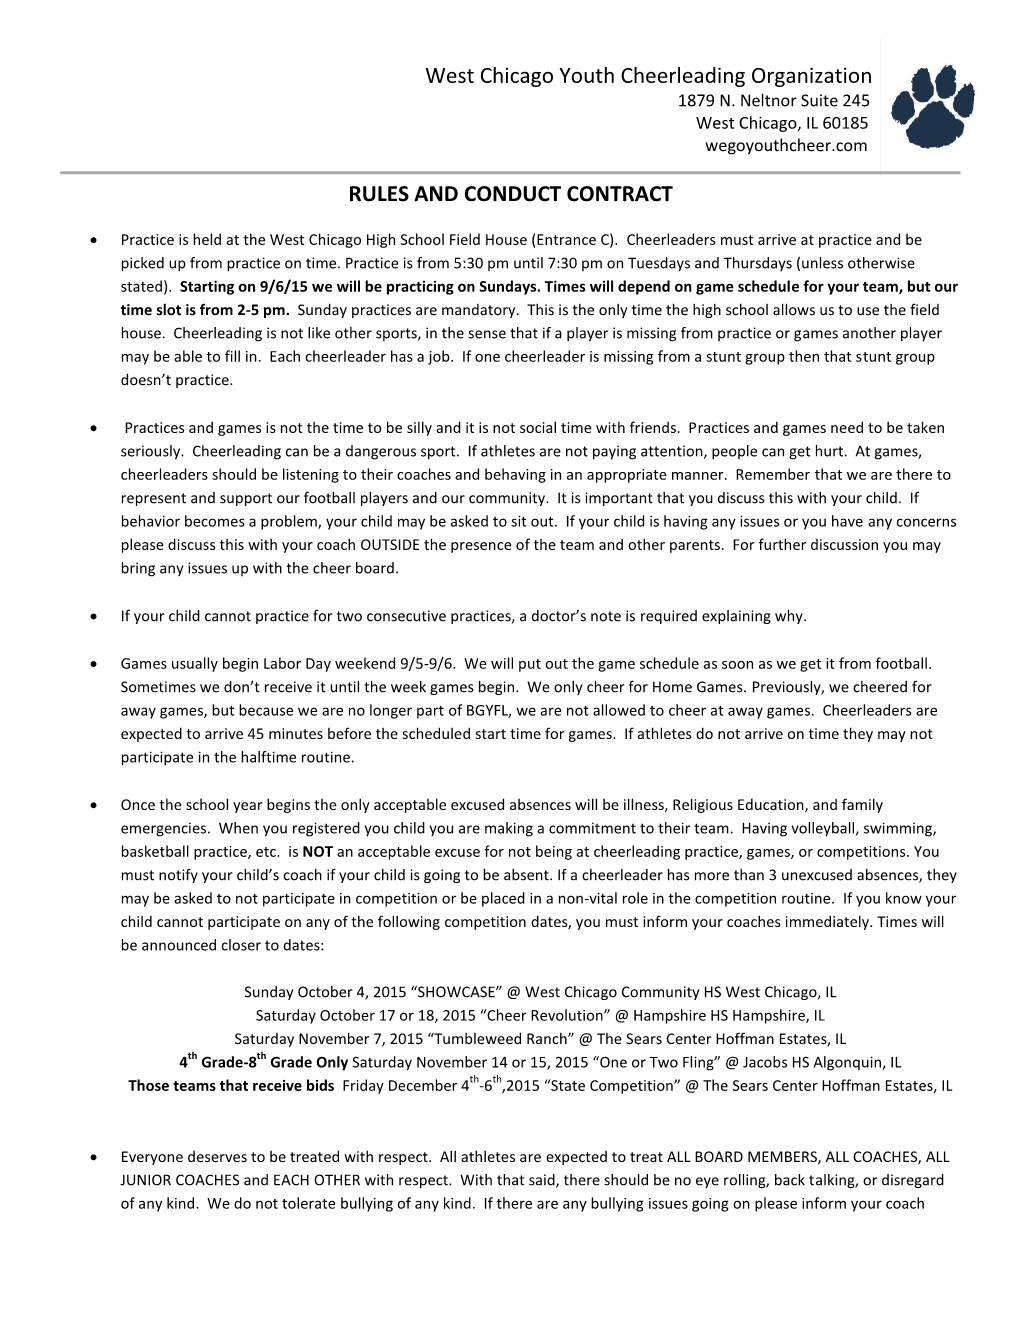 West Chicago Youth Cheerleading Organization Rules and Conduct Form